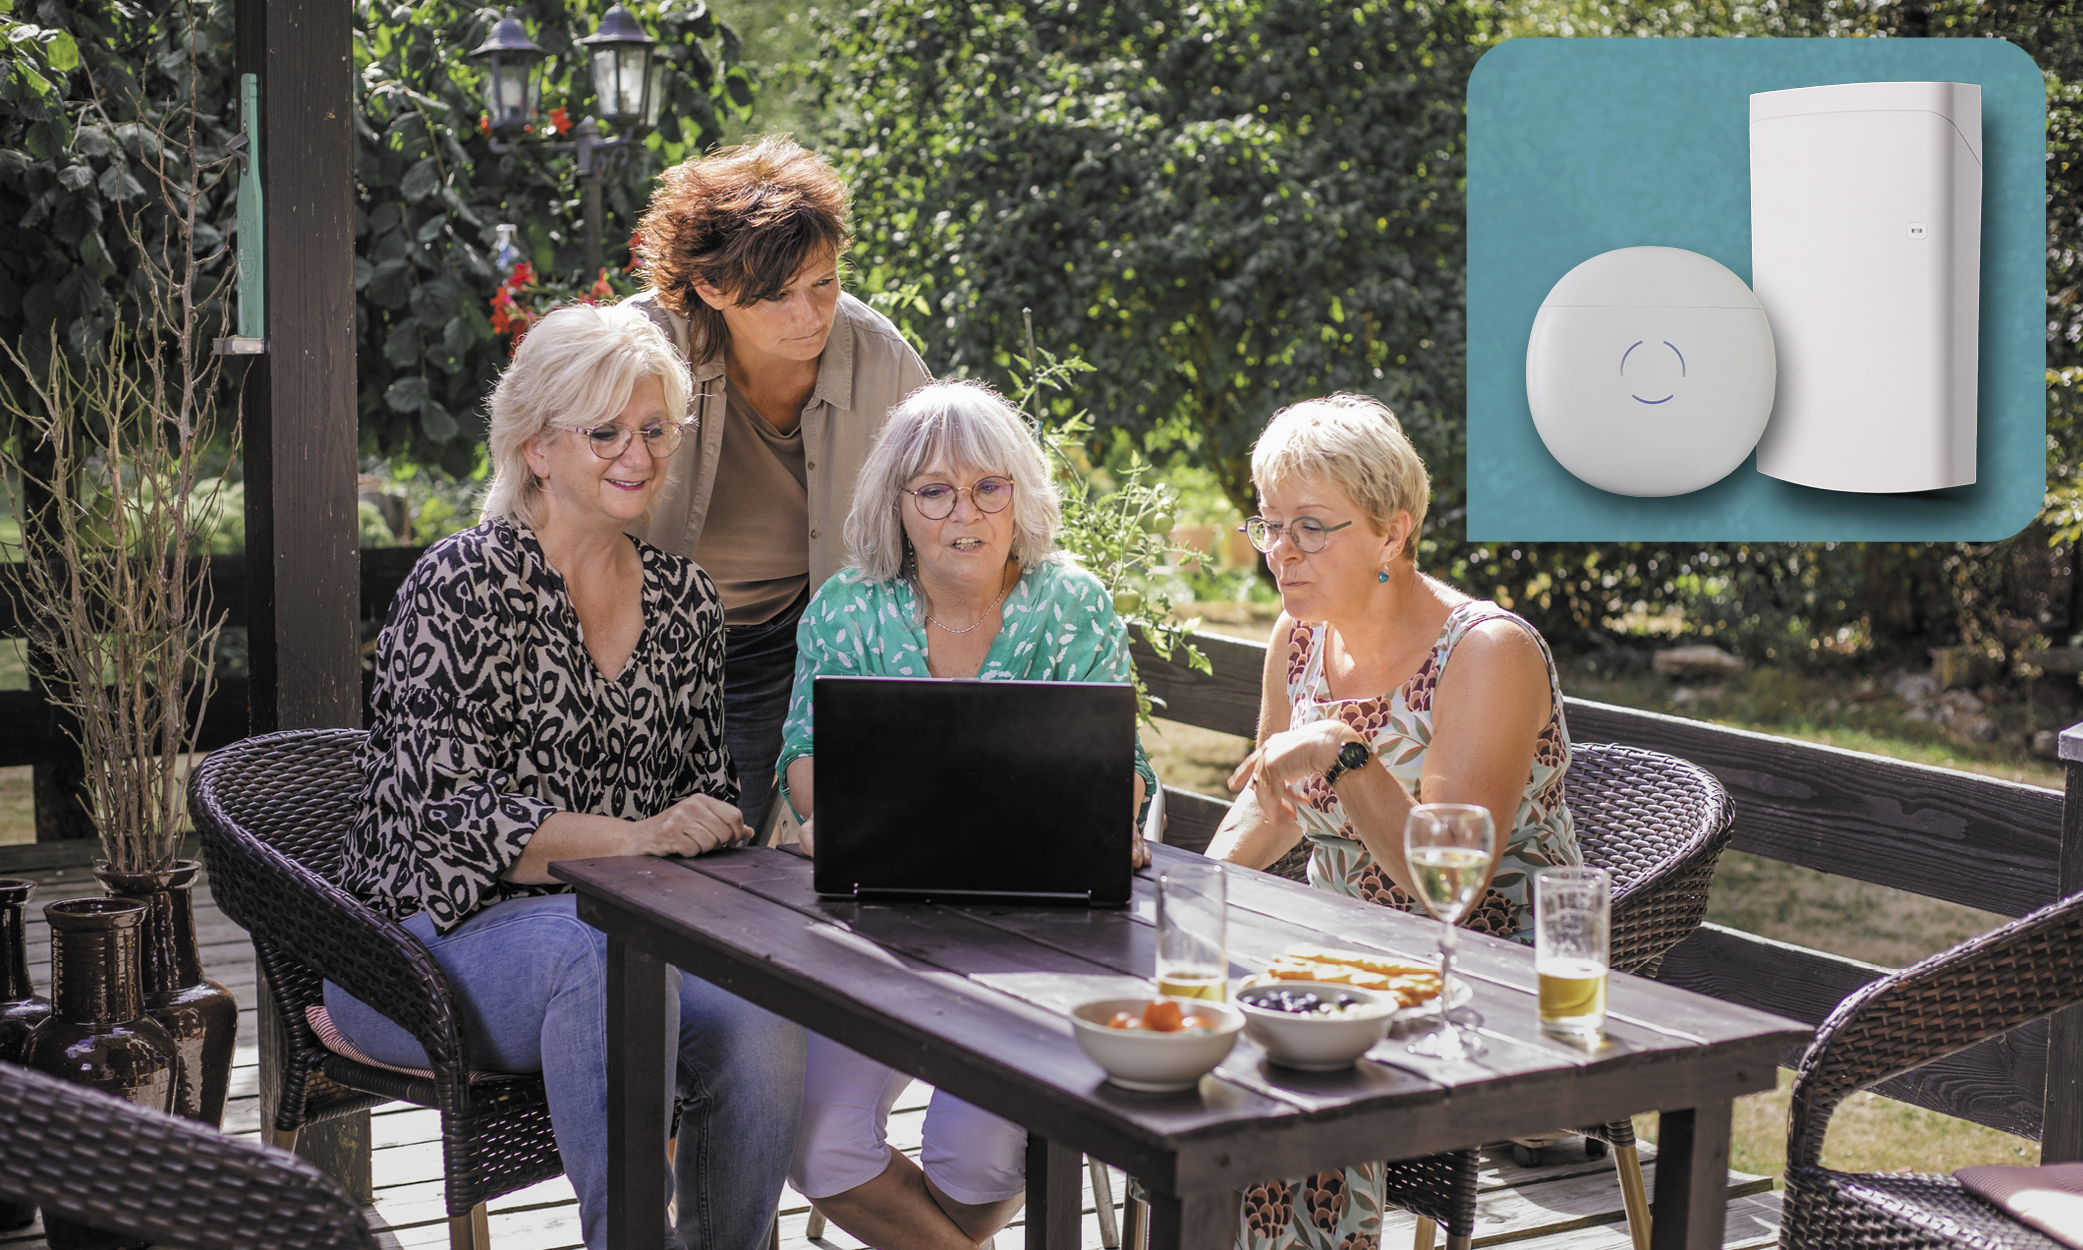 Four women gathered around an outdoor patio table looking at a laptop.